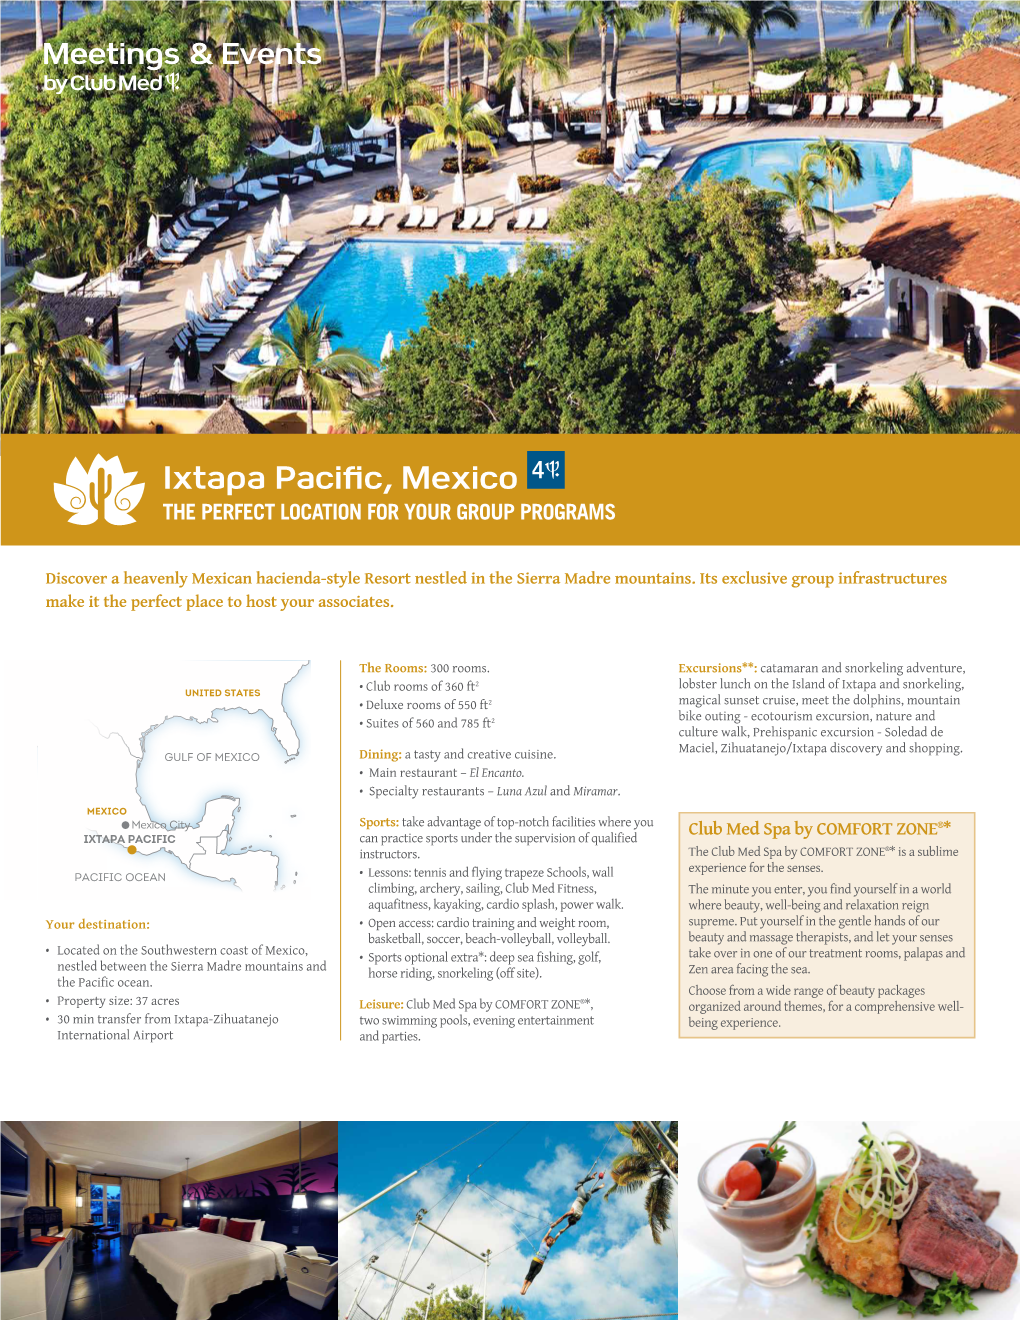 Ixtapa Pacific, Mexico 4 the PERFECT LOCATION for YOUR GROUP PROGRAMS